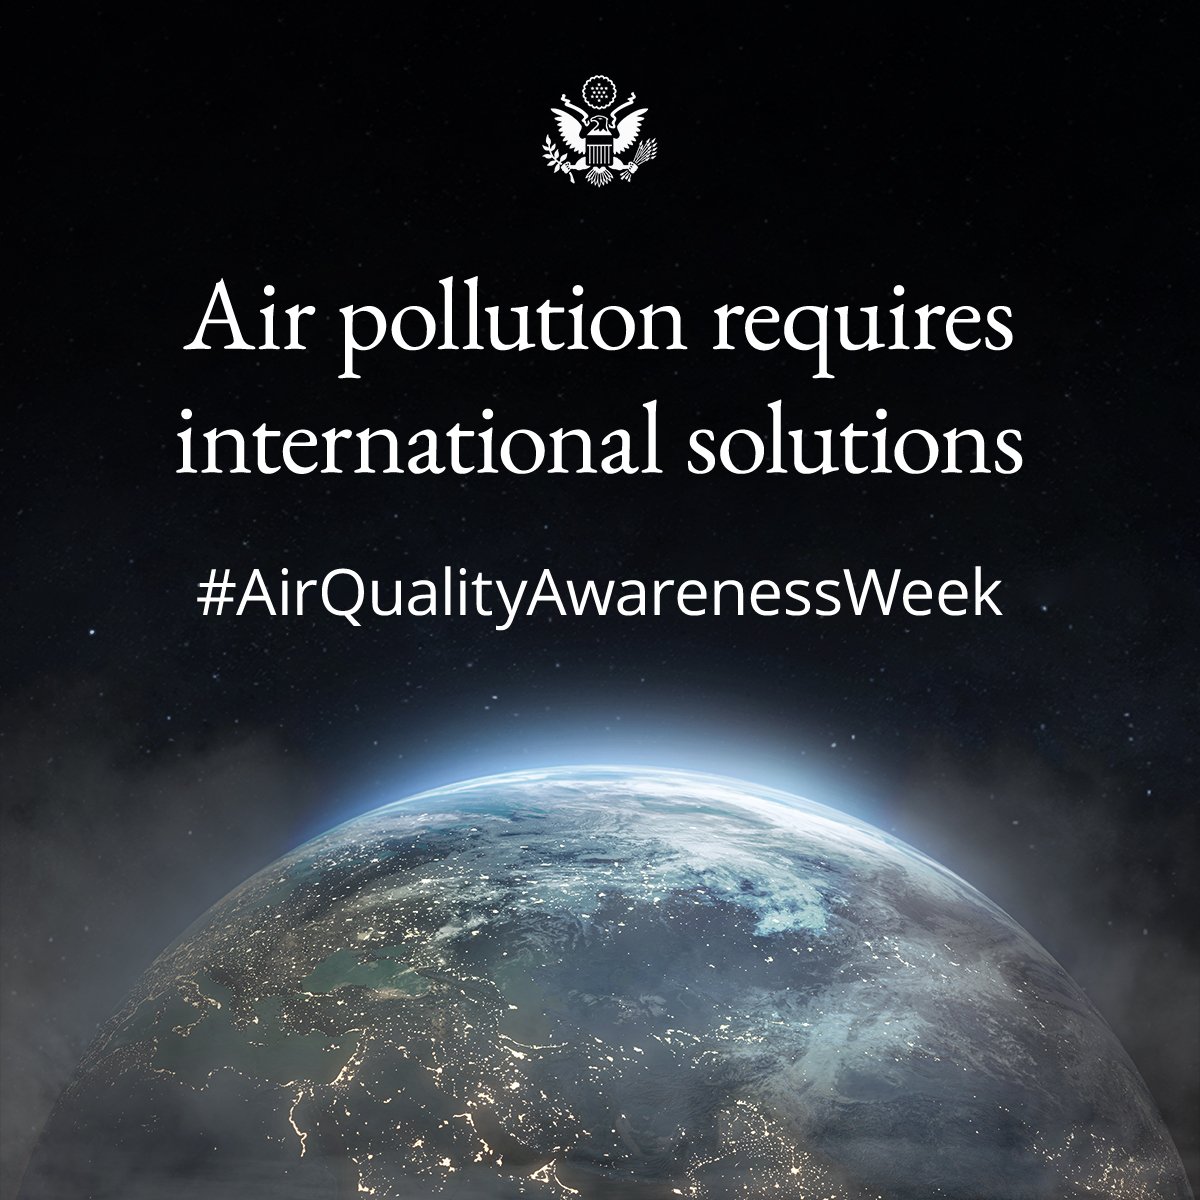 Air pollution is a global problem. Through international cooperation and shared responsibility, we can address this challenge and create a healthier, cleaner future for all. #AirQualityAwarenessWeek 🌬️🌐 U.S. embassies are now forecasting air quality 24/7 in cities around the…